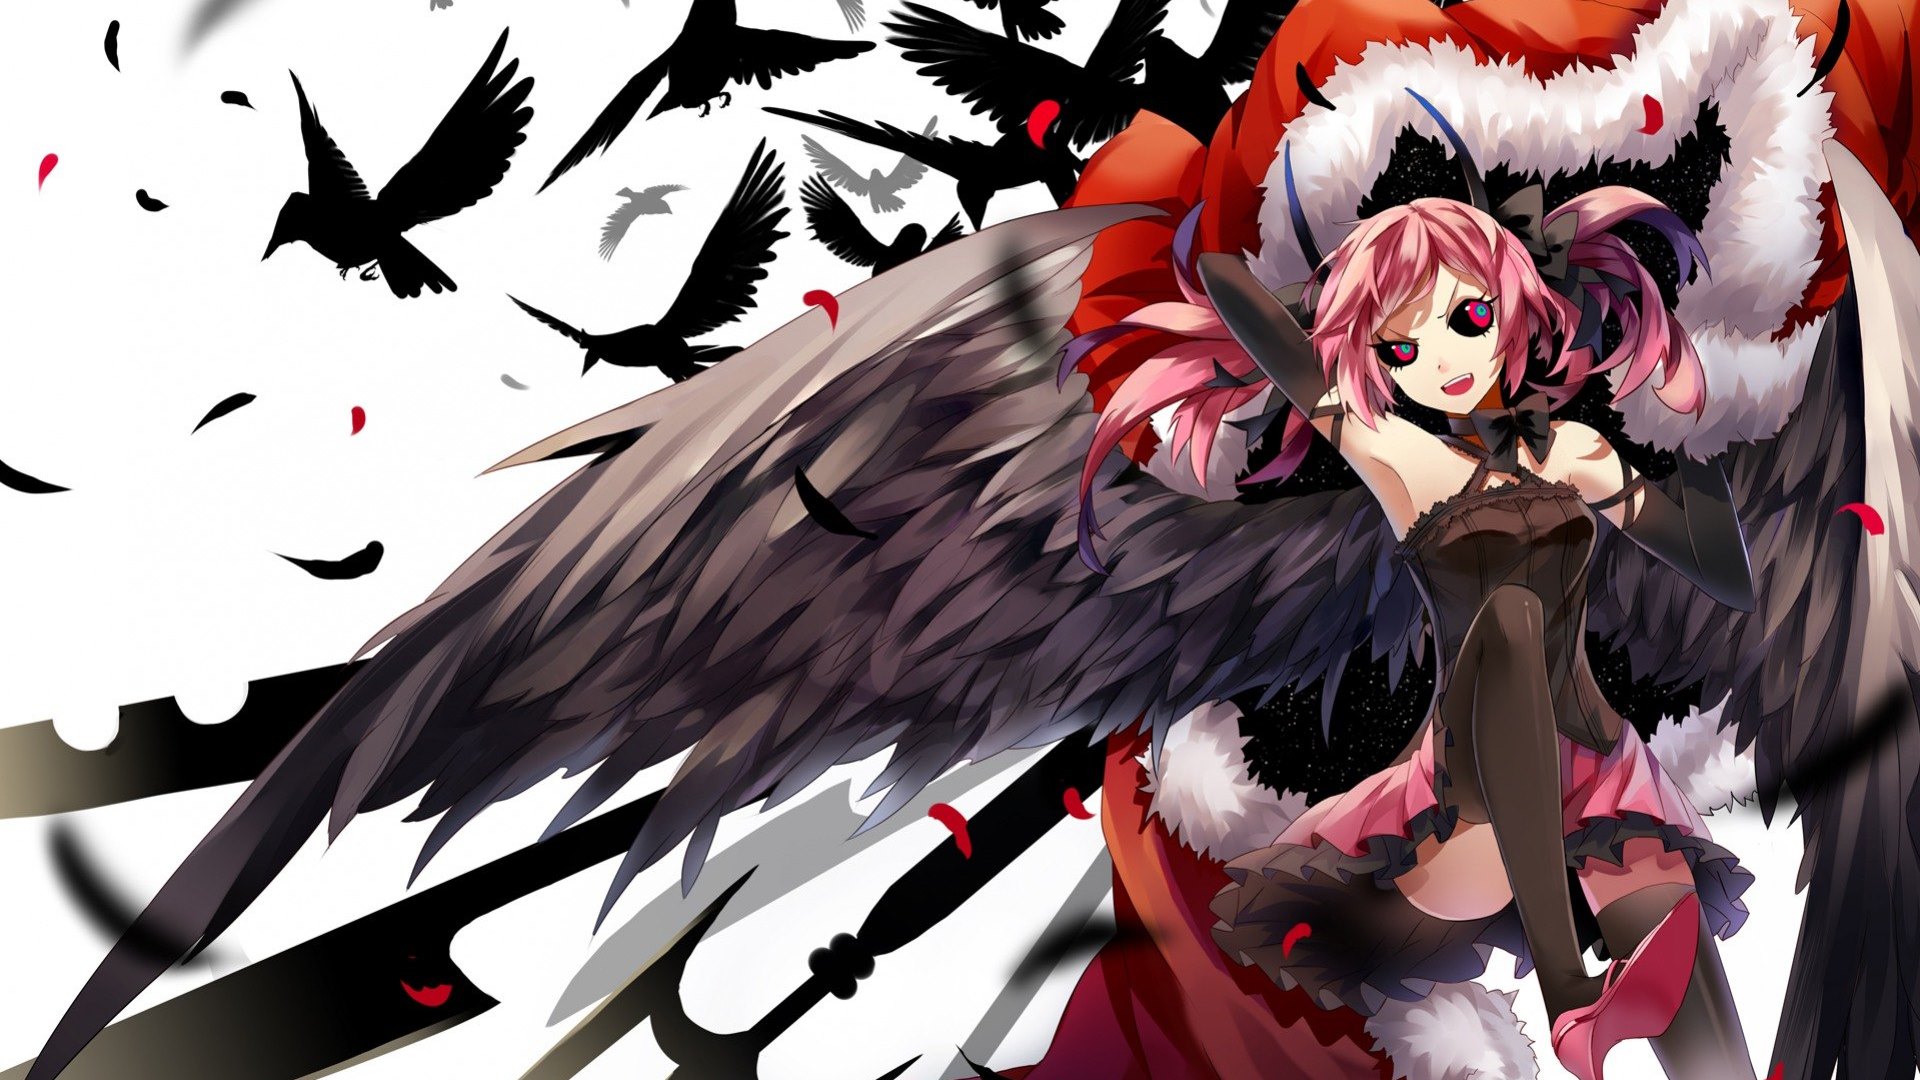 Wallpaper id red pretty wings dress raven angel black beautiful girl crazy anime beauty crow pink feathers free download